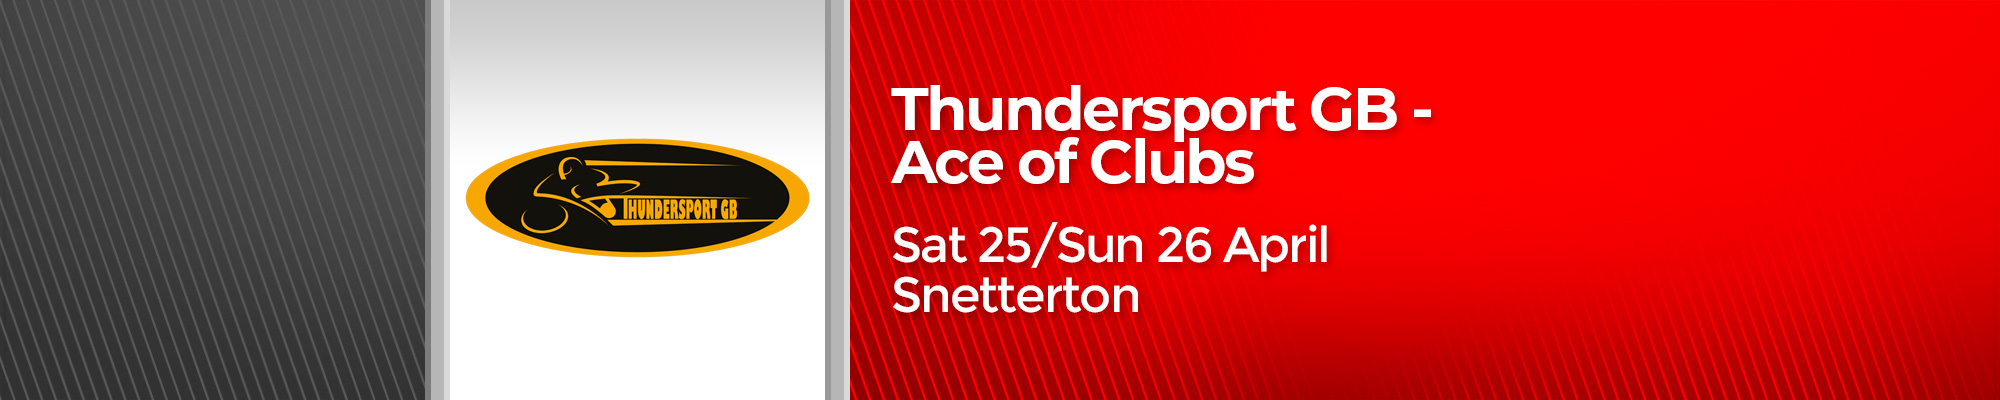  Thundersport GB - Ace of Clubs - POSTPONED